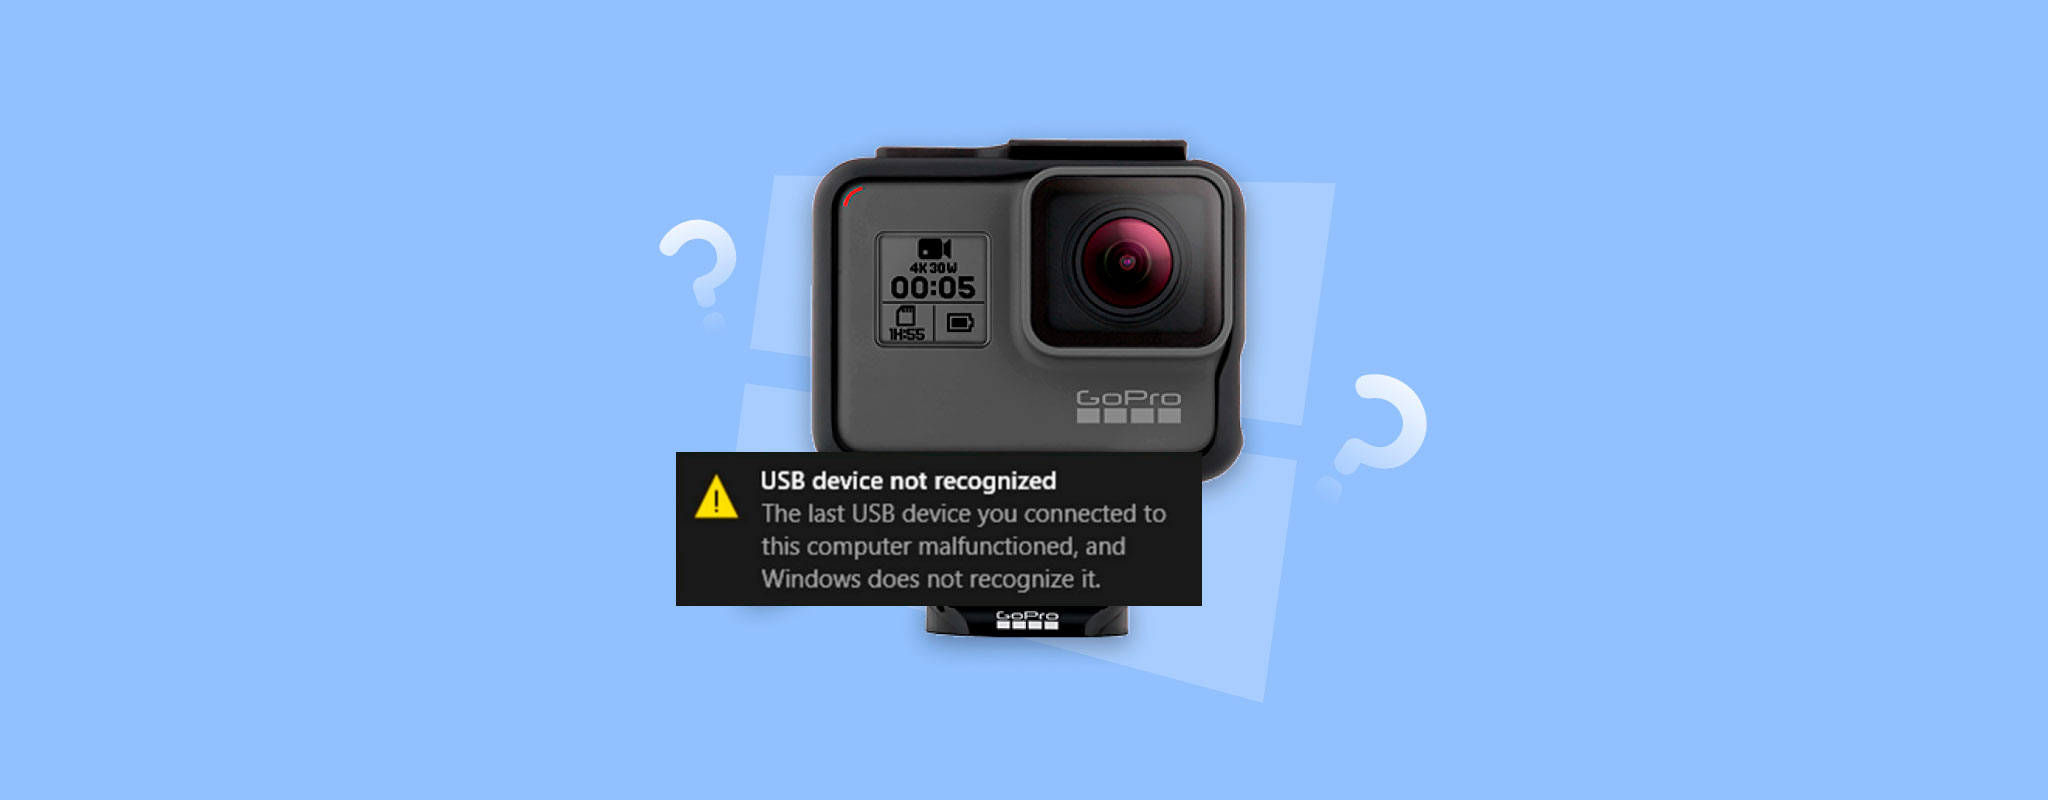 Sport Soveværelse plantageejer GoPro Is Not Showing Up on PC: How to Fix and Recover Files